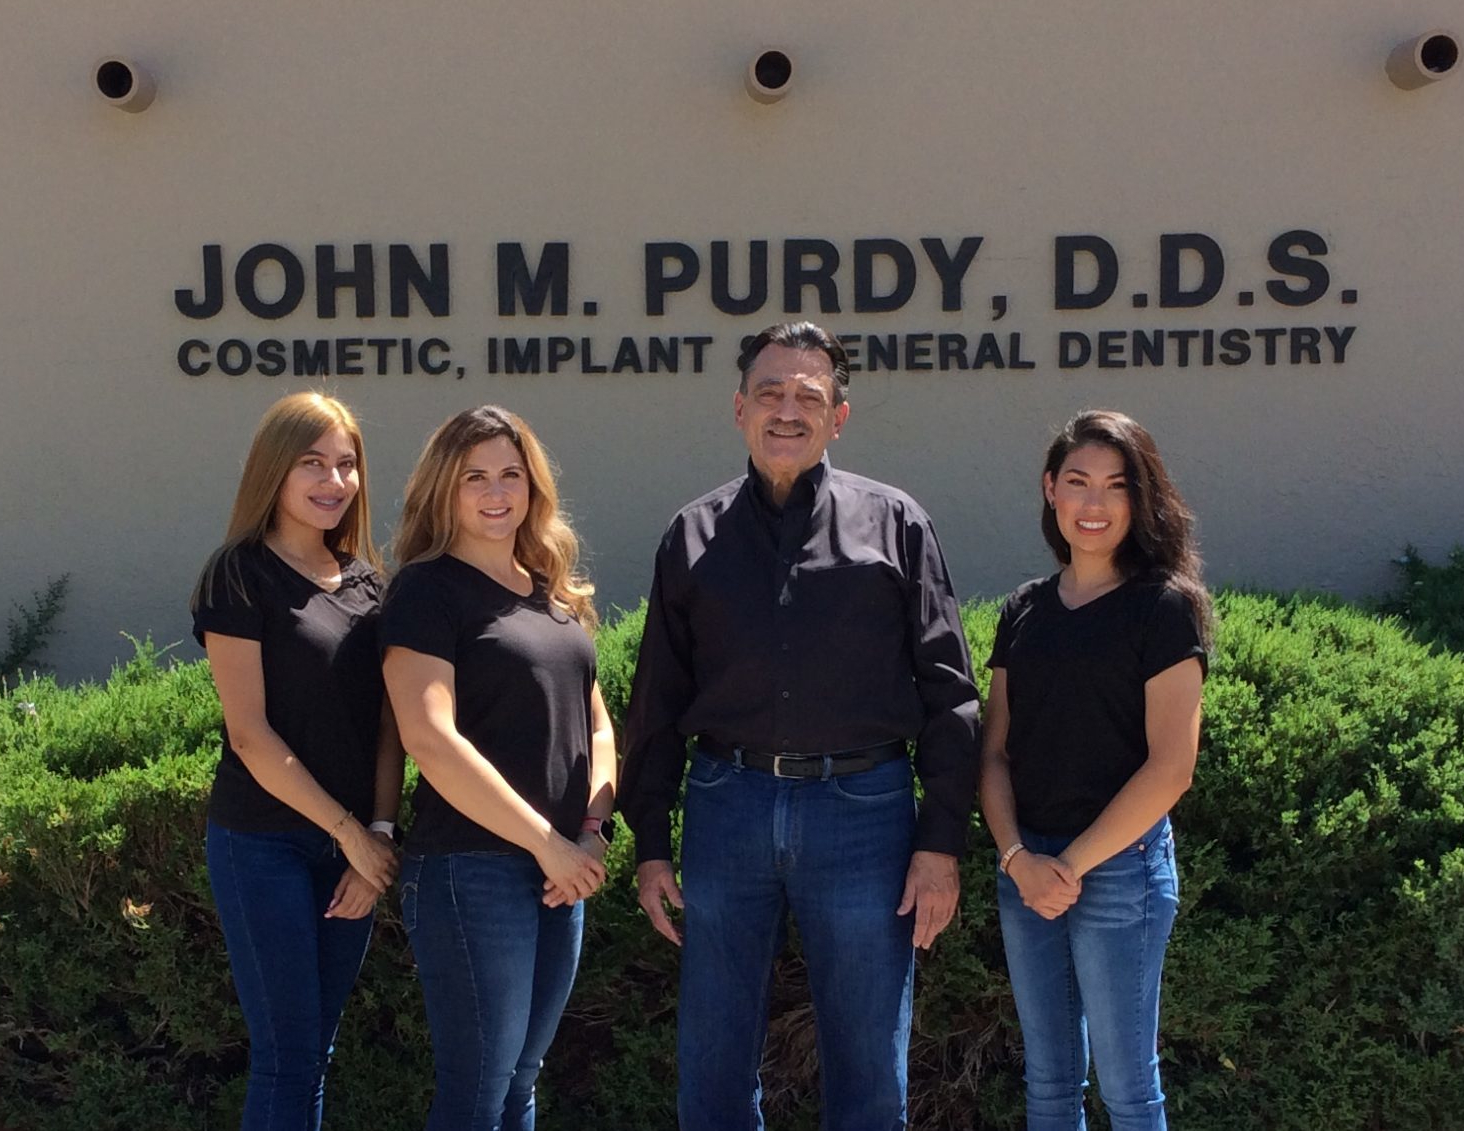 Dr. John M. Purdy DDS | Team Photo | Your Dental Home in El Paso, Texas Specializing in Cosmetic Dentistry, Dental Implants, TMJ and TMD Treatment, Sleep Apnea Treatment, and Dentures